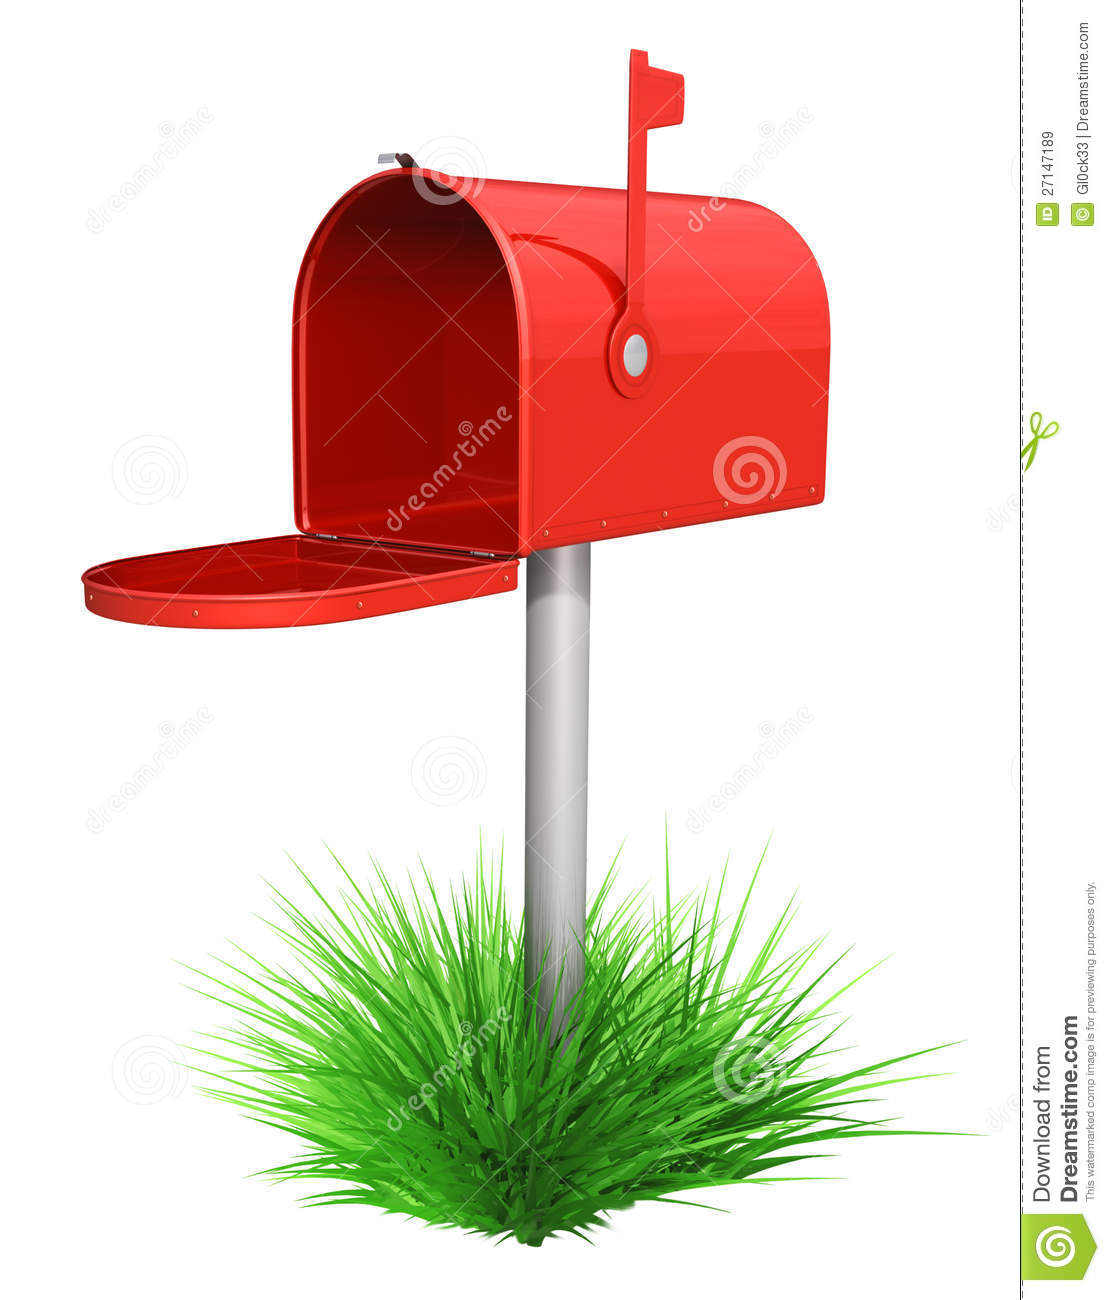 Empty Red Mailbox And Green Grass Royalty Free Stock Images   Image